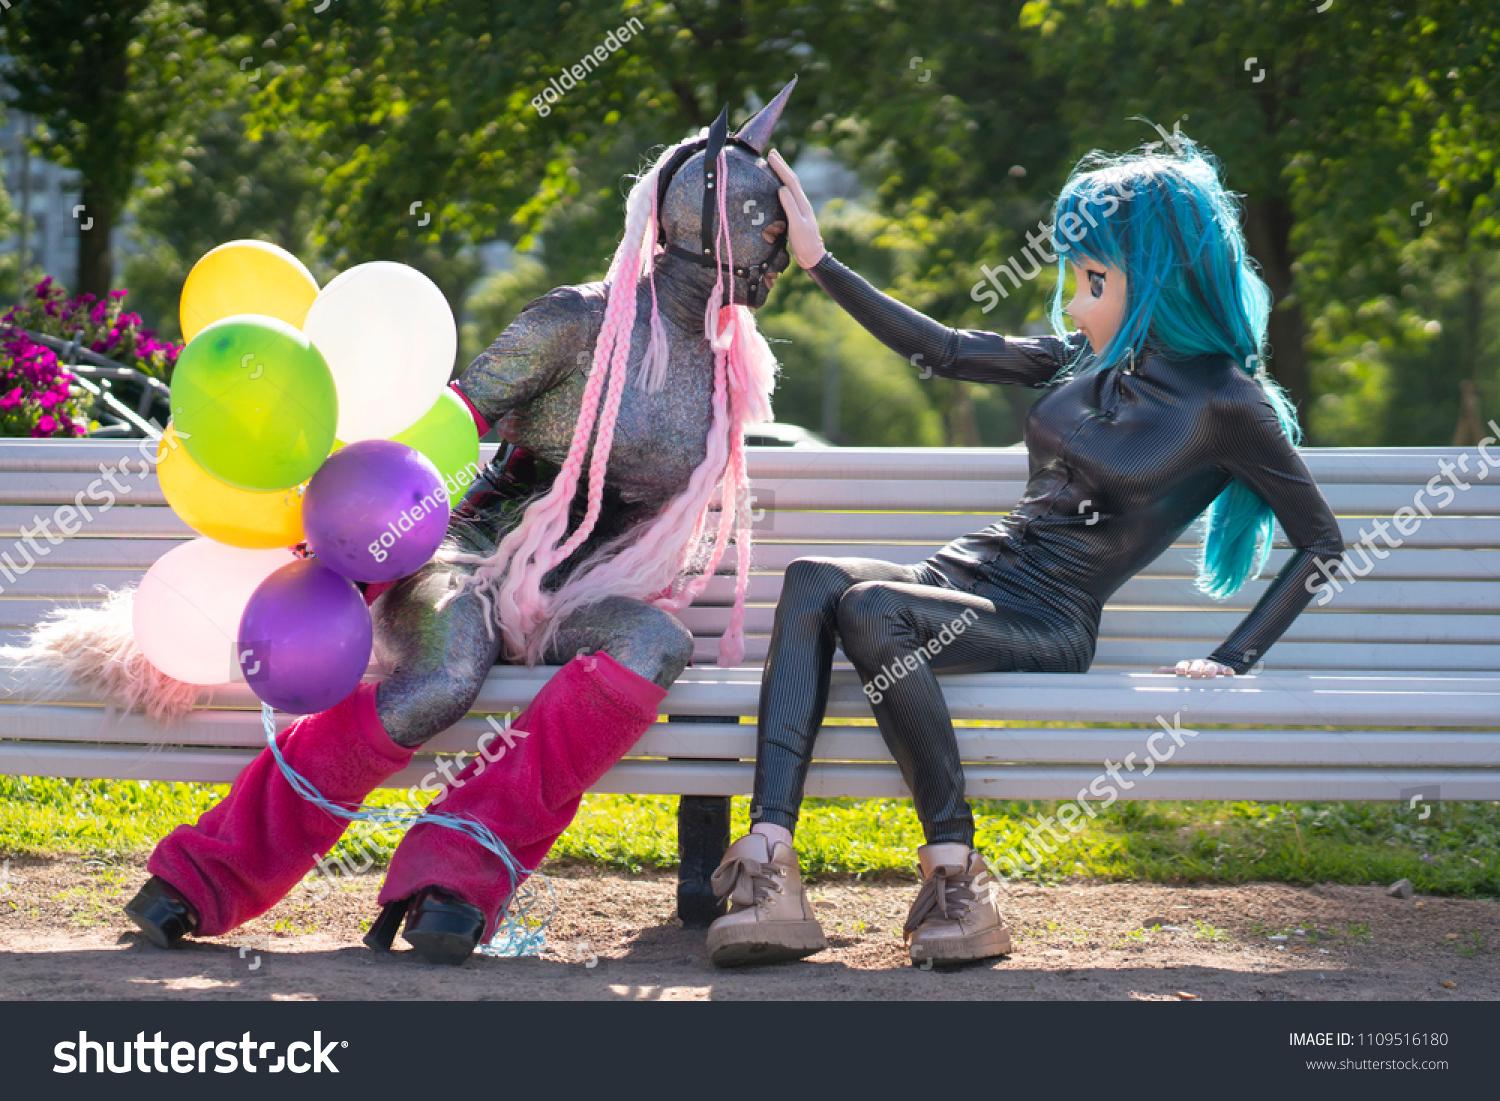 A cool yet strange stock photo from shutterstock of an anime girl pushing away someone dressed as a unicorn holding balloons. 